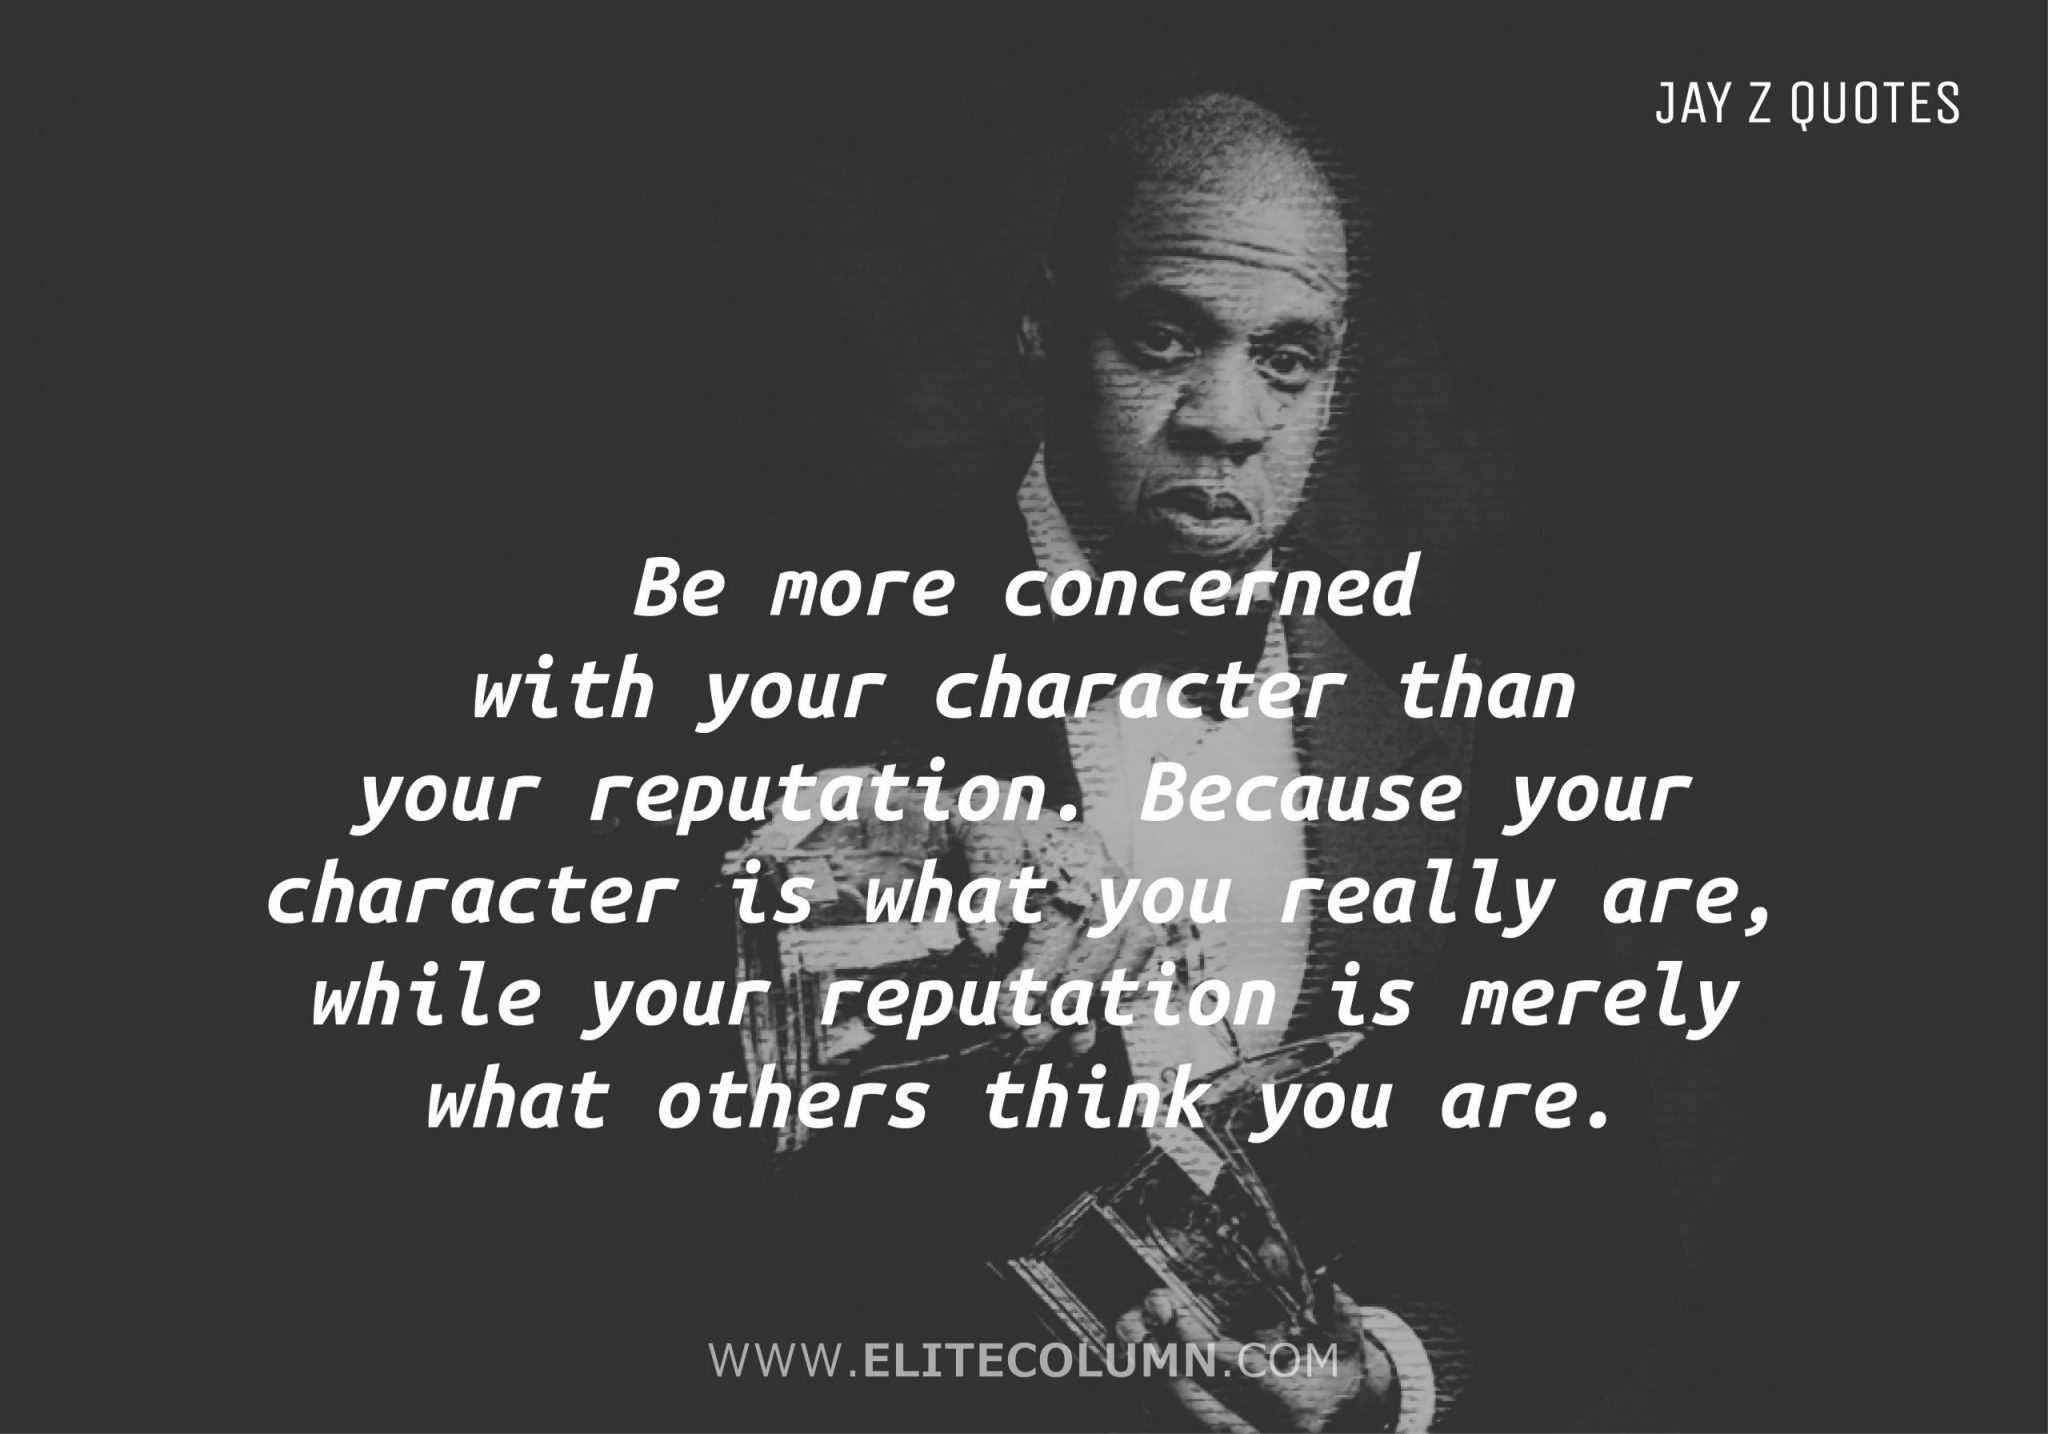 Jay Z Quotes (2)